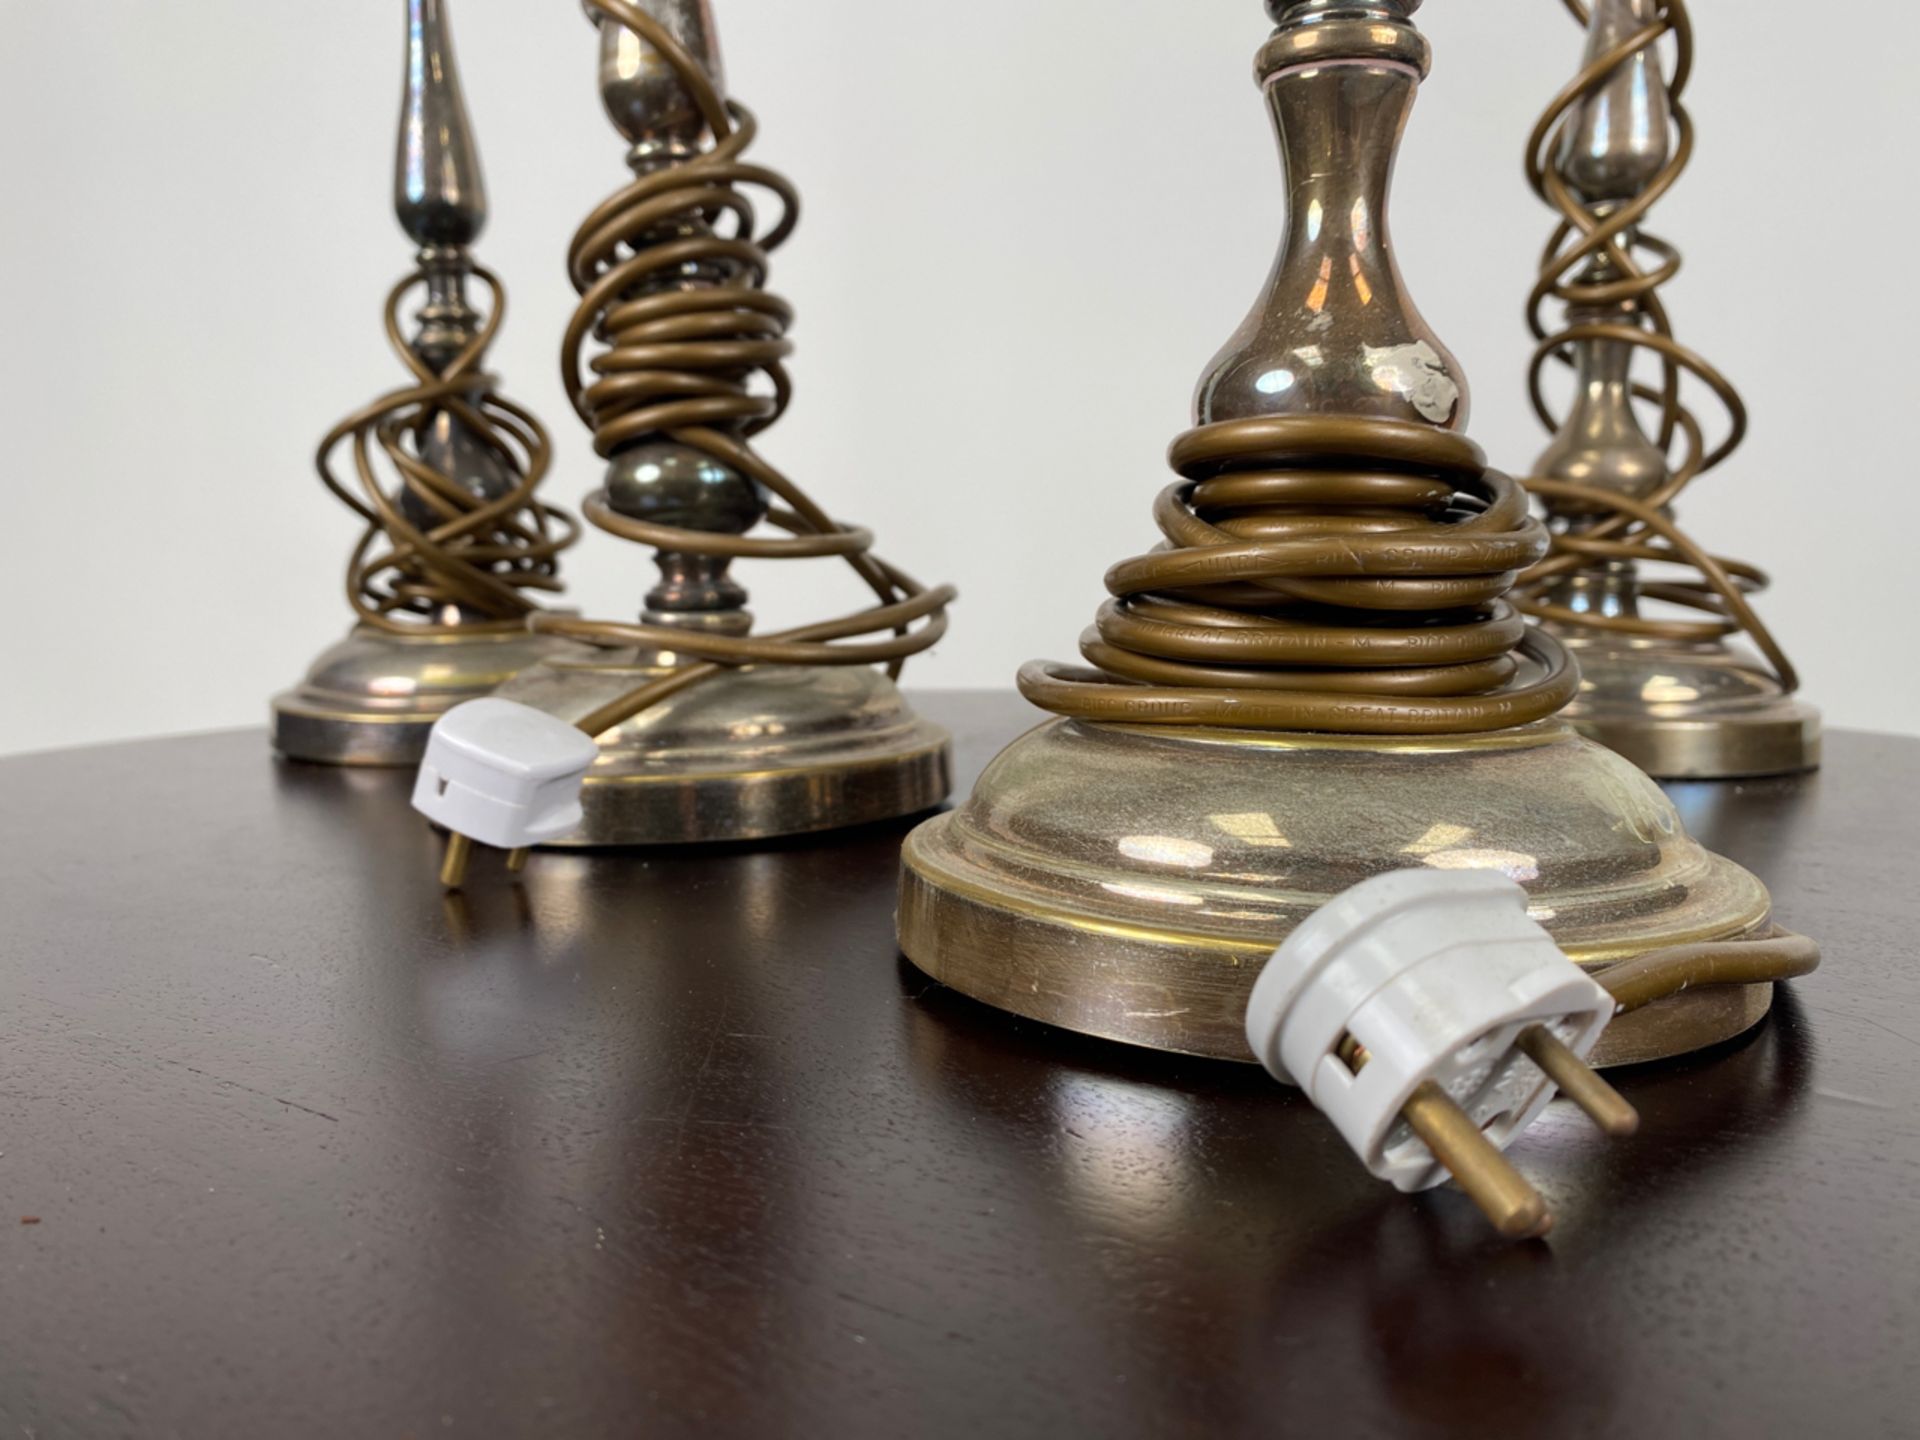 Set of 4 Nickel Plated Table Lamps - Image 3 of 4